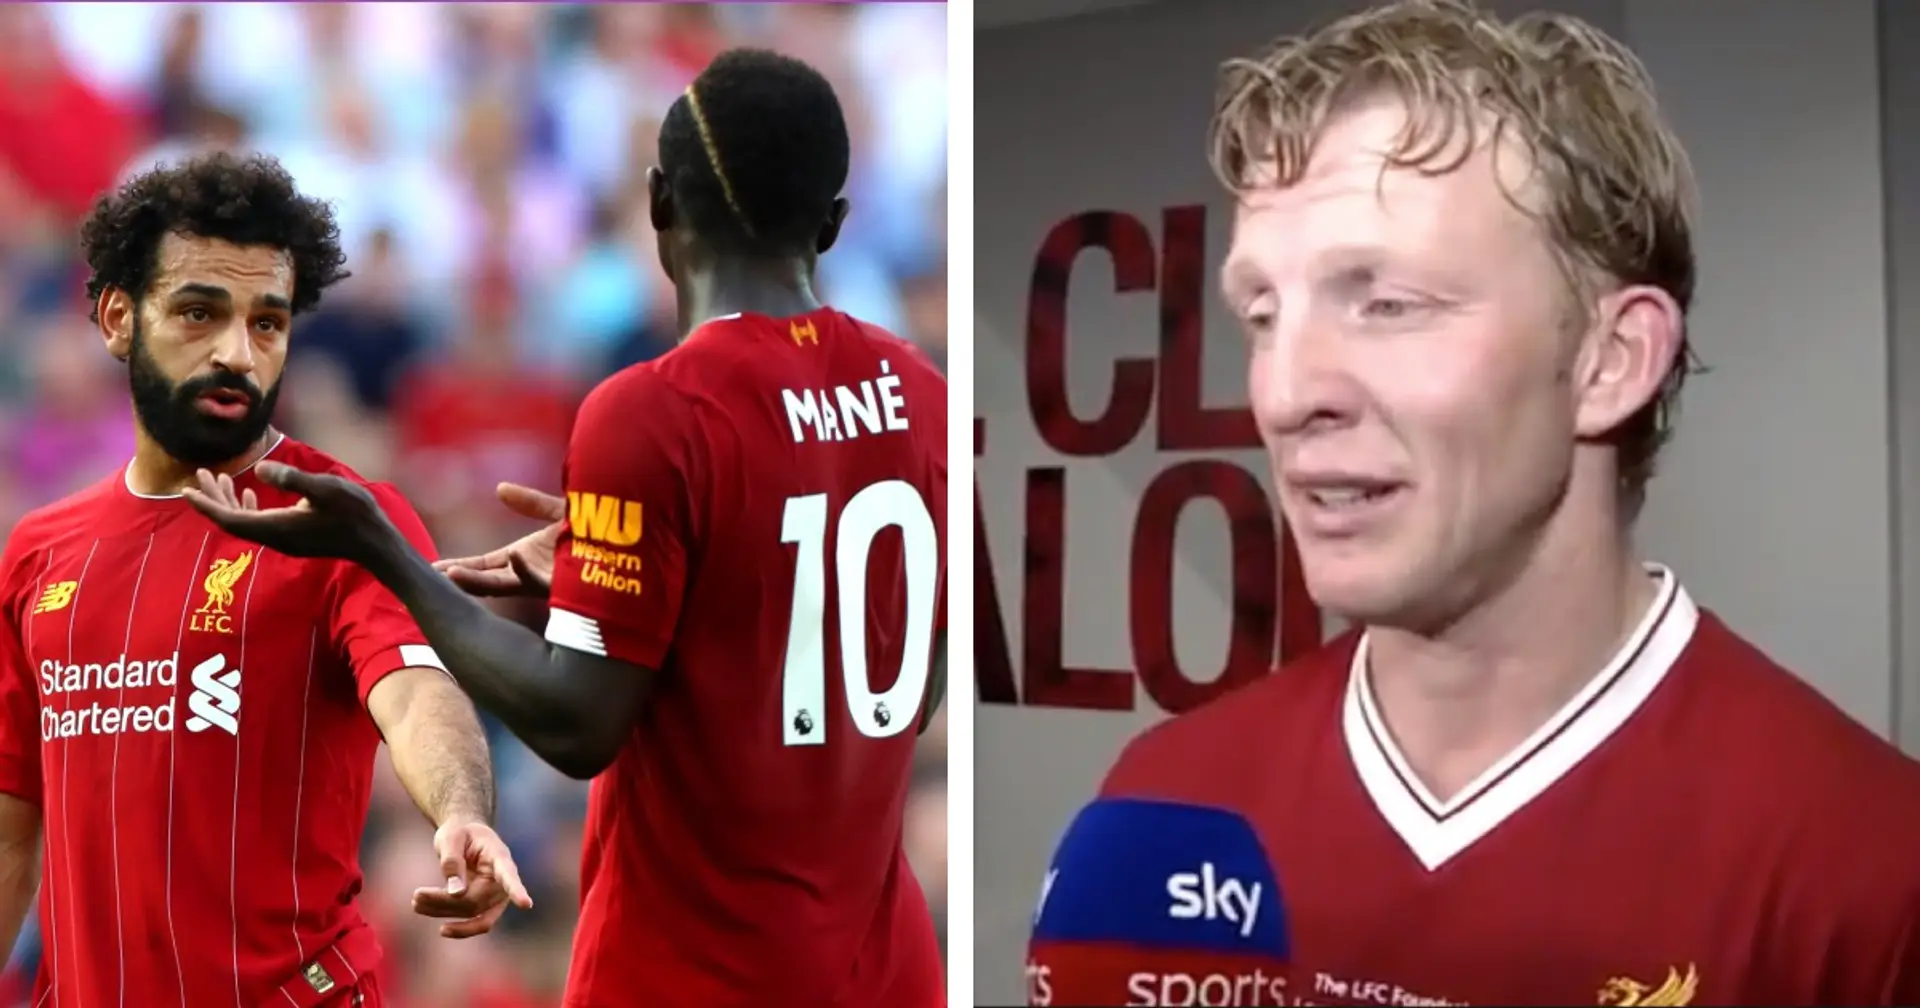 'They need each other': Kuyt explains why there will be no trouble between Mo Salah and Sadio Mane after AFCON battle